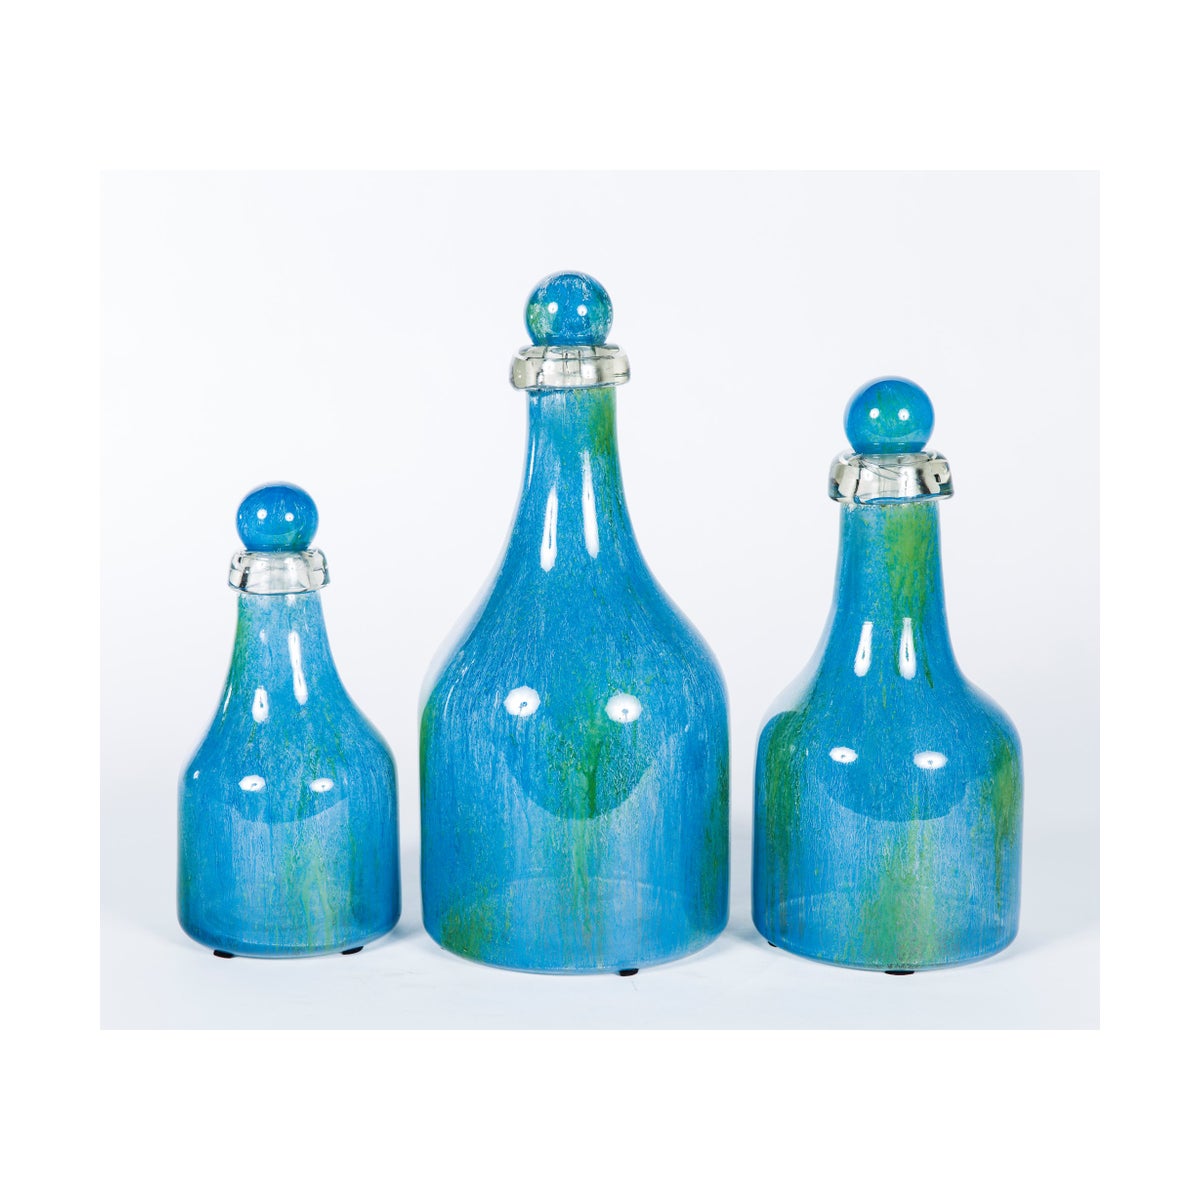 Set of 3 Bottles with Tops in Blue Lagoon Finish